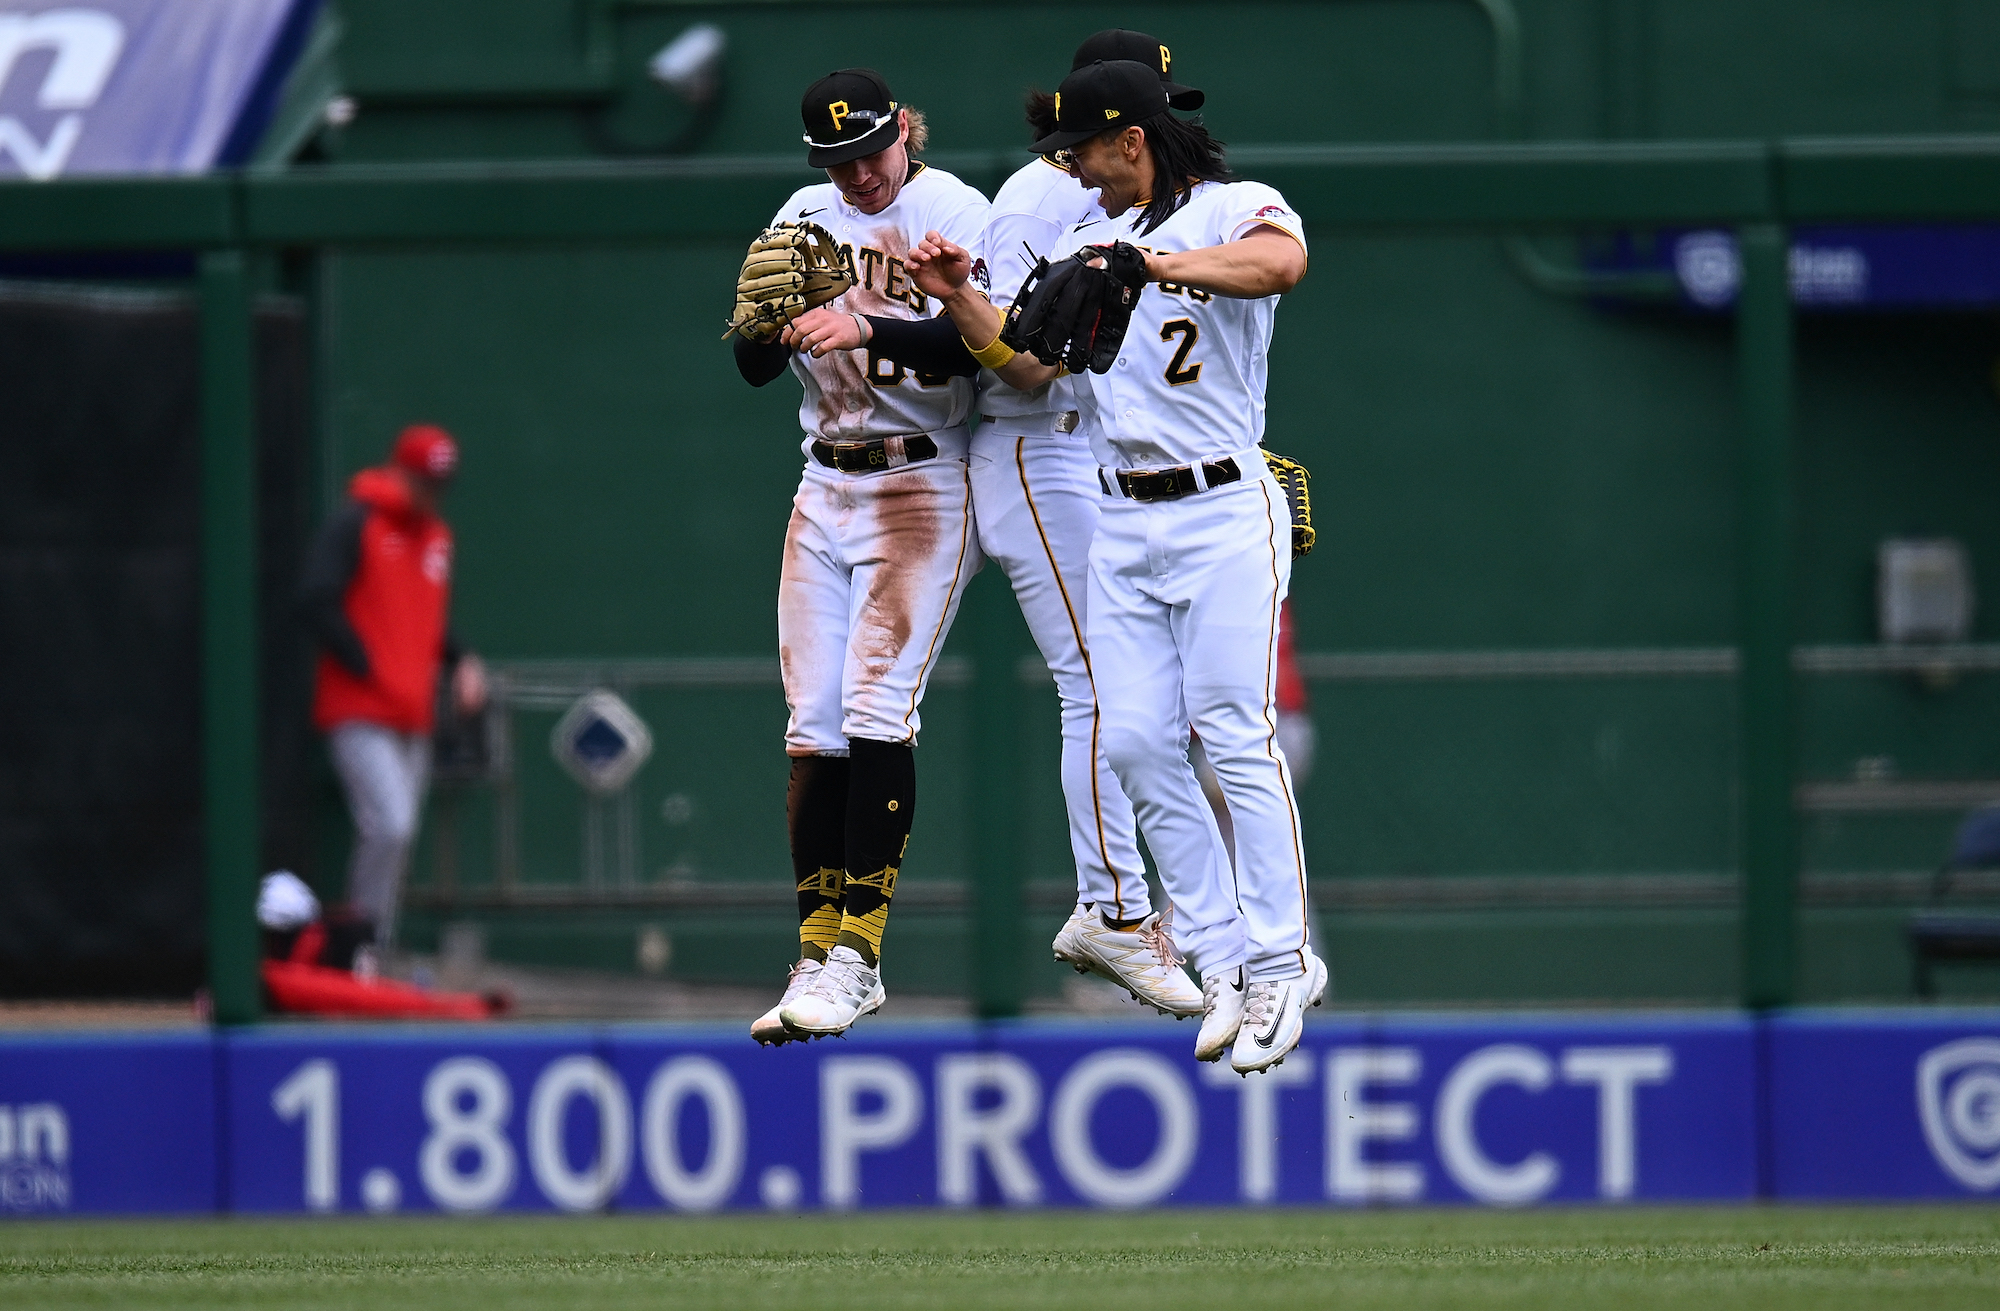 PITTSBURGH, PA - APRIL 23: Jack Suwinski #65, Ji Hwan Bae #3 and Connor Joe #2 of the Pittsburgh Pirates celebrate after a 2-0 win over the Cincinnati Reds at PNC Park on April 23, 2023 in Pittsburgh, Pennsylvania. (Photo by Joe Sargent/Getty Images)